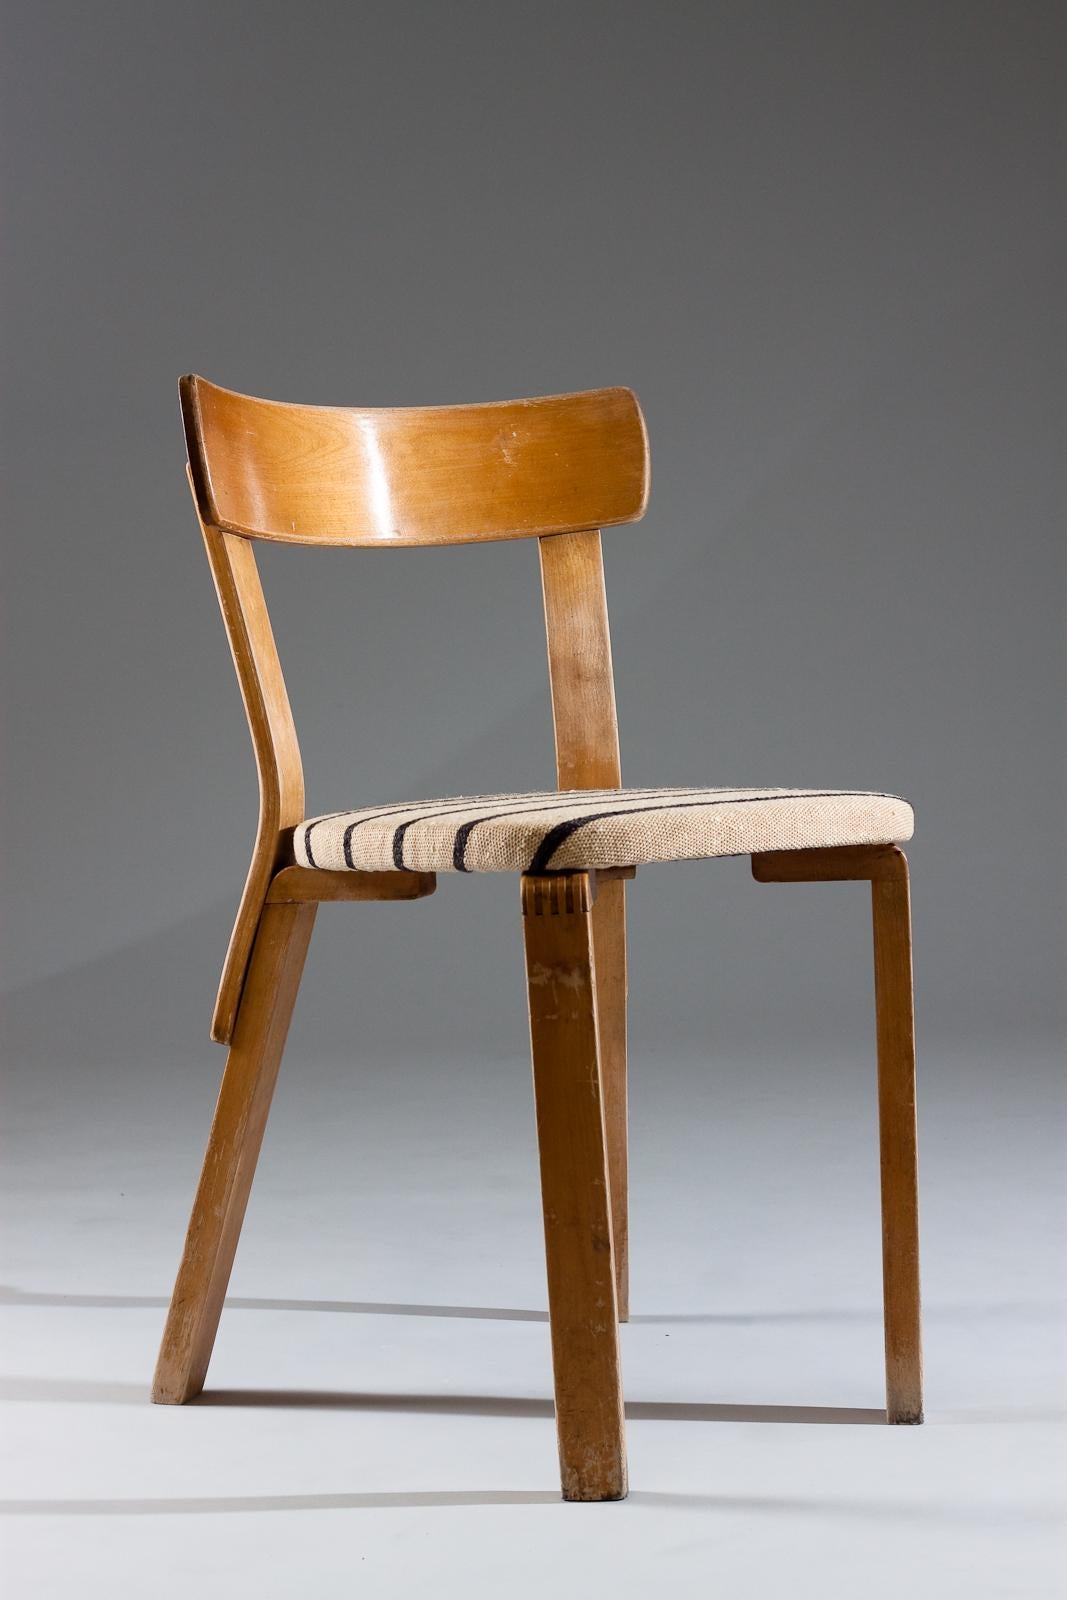 Early and rare War time leg 69 chair by Alvar Aalto. This is a collectors piece refurbished in a vintage Artek fabric. The War-leg is different from the L-leg and was made during a short period during/after the war when the glue for making the bent